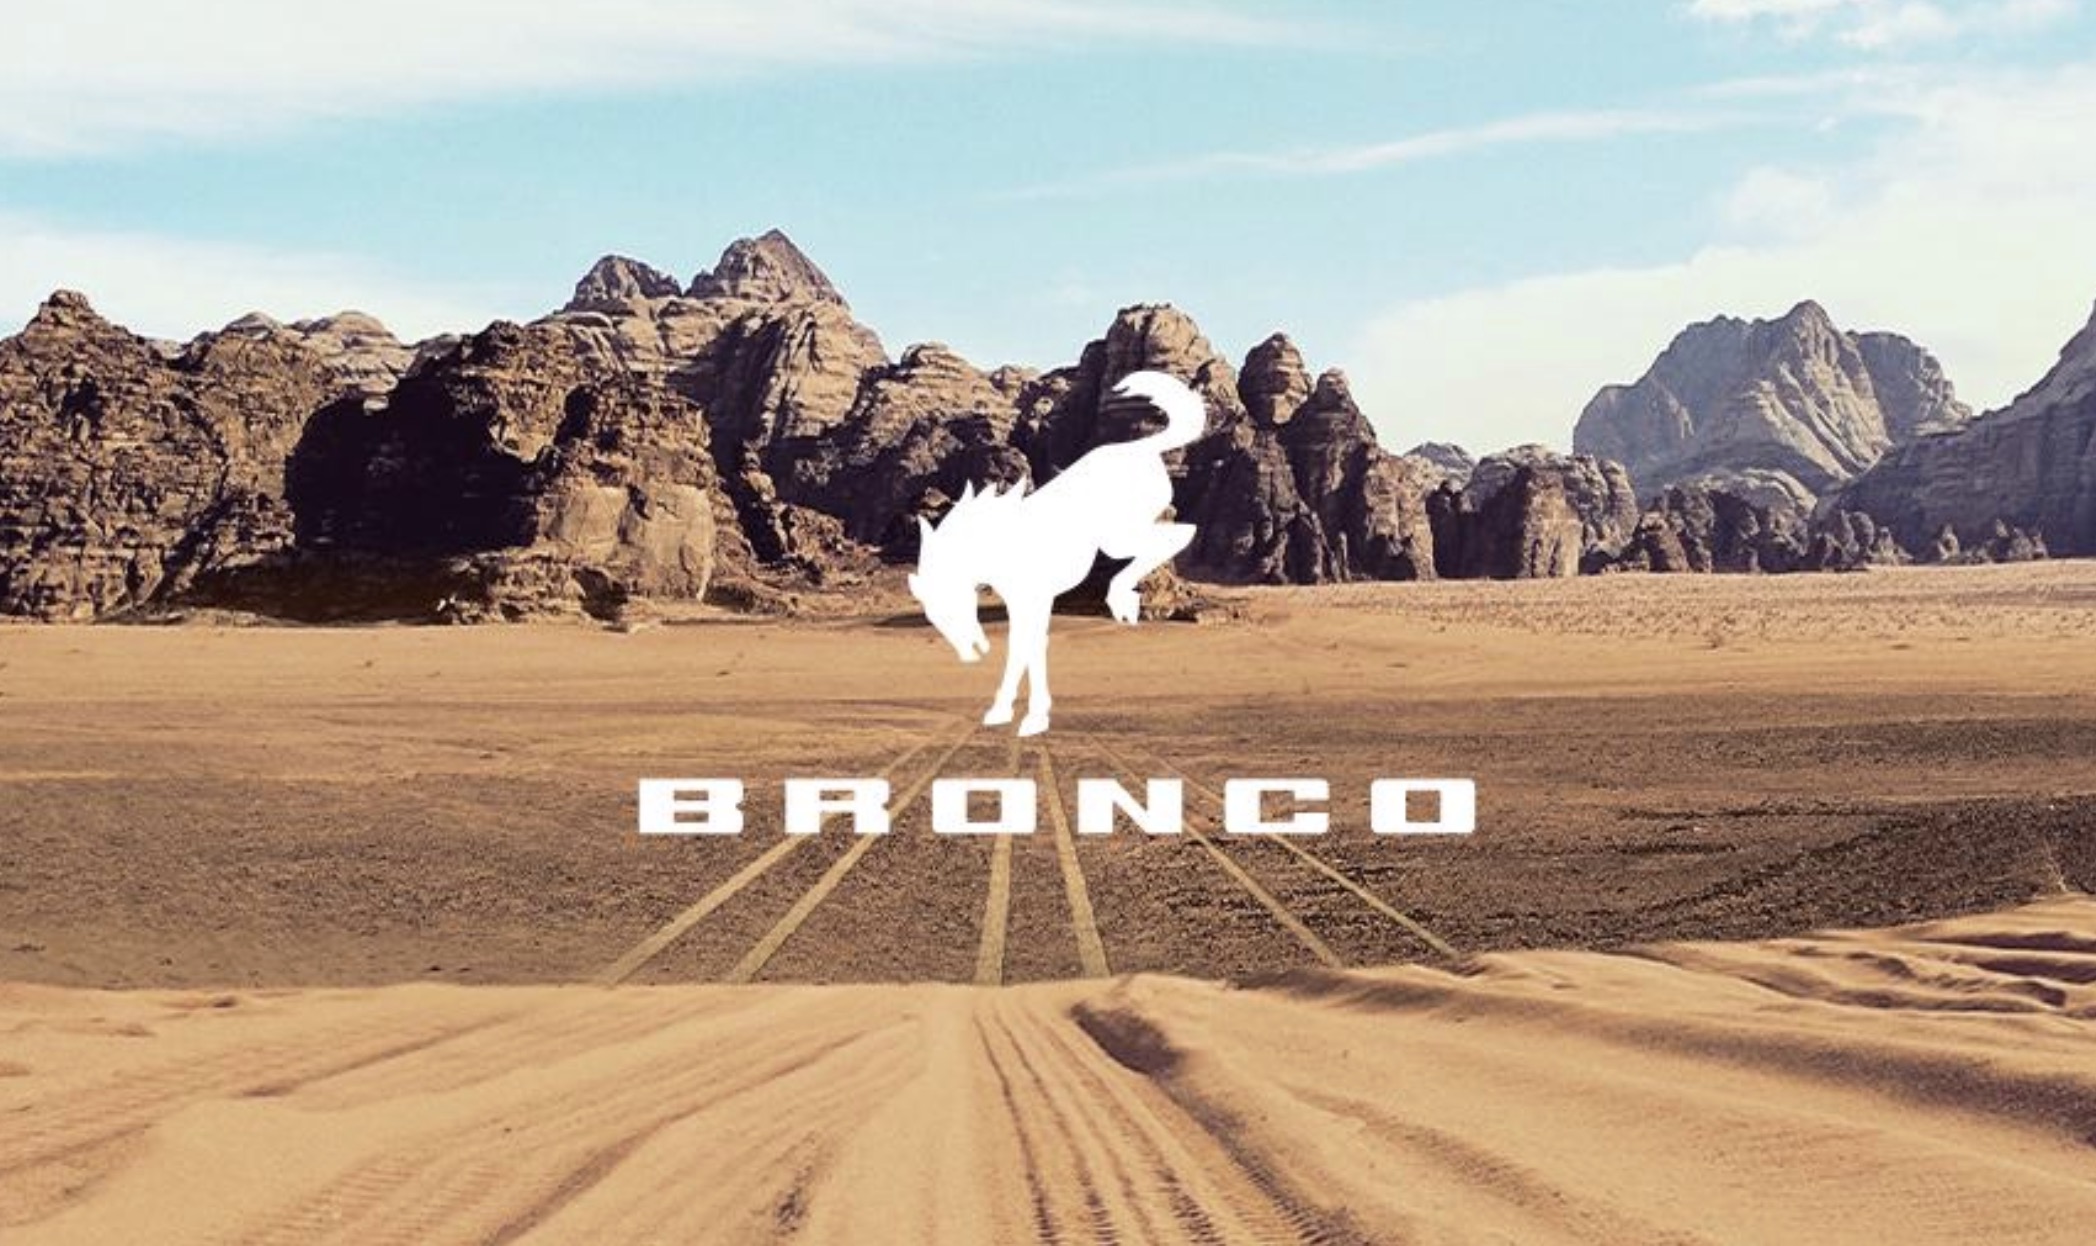 Ford is partnering with Disney to unveil all new Bronco SUVs on July 13th